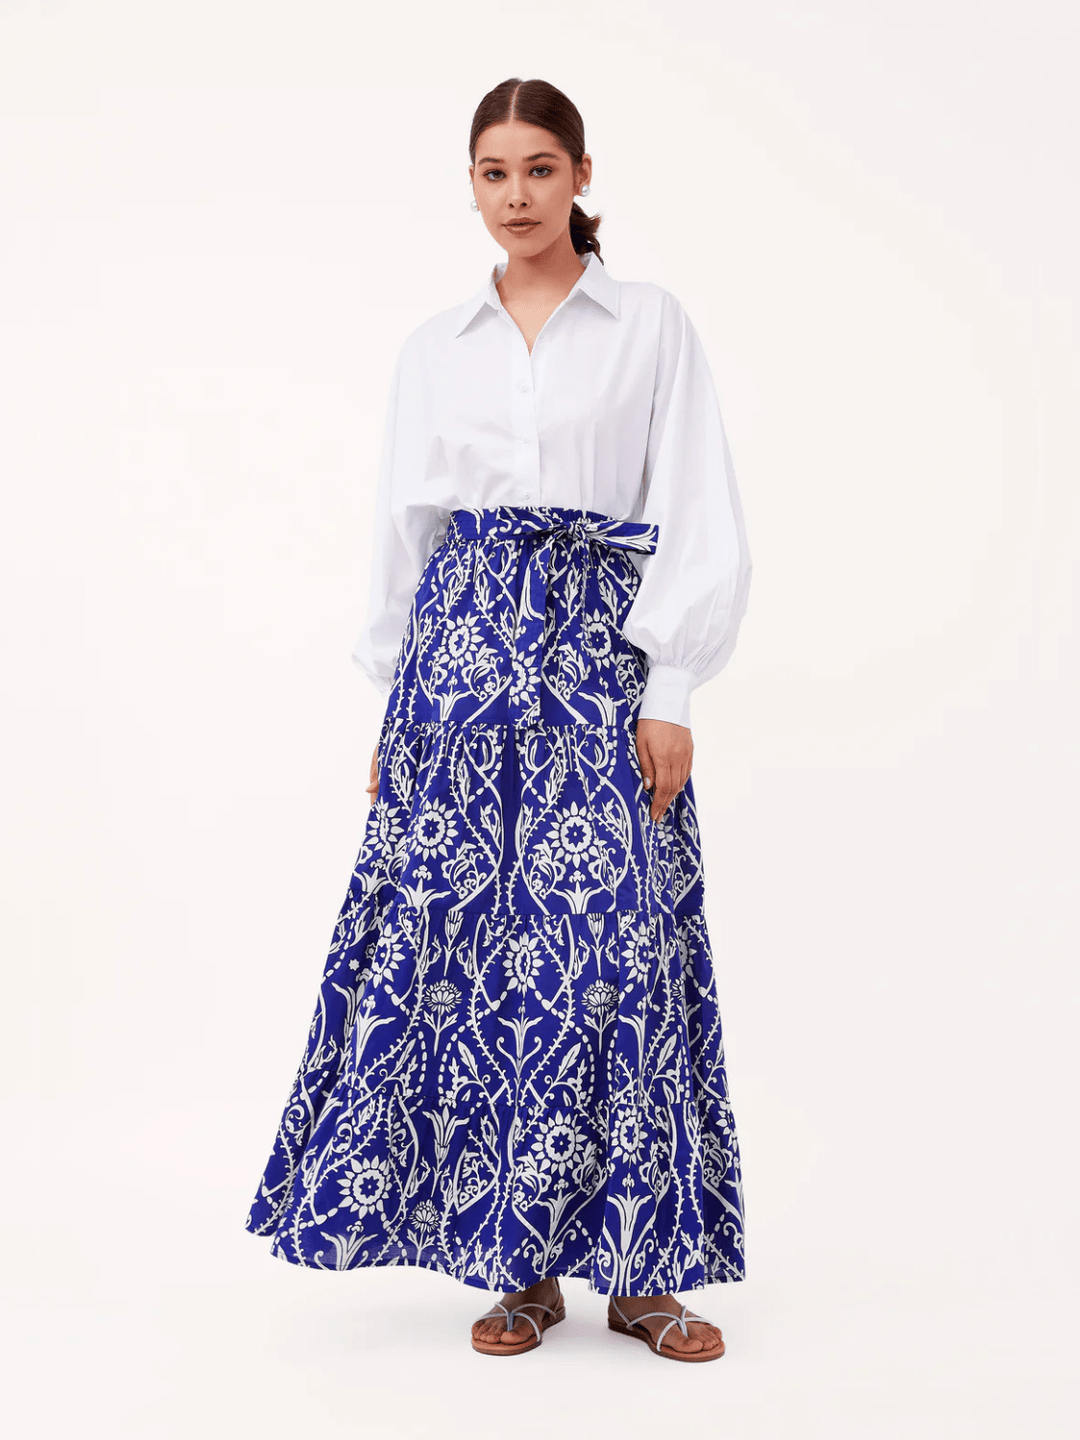 Beyond by Vera Skirts Gia Skirt in Assisi Indigo